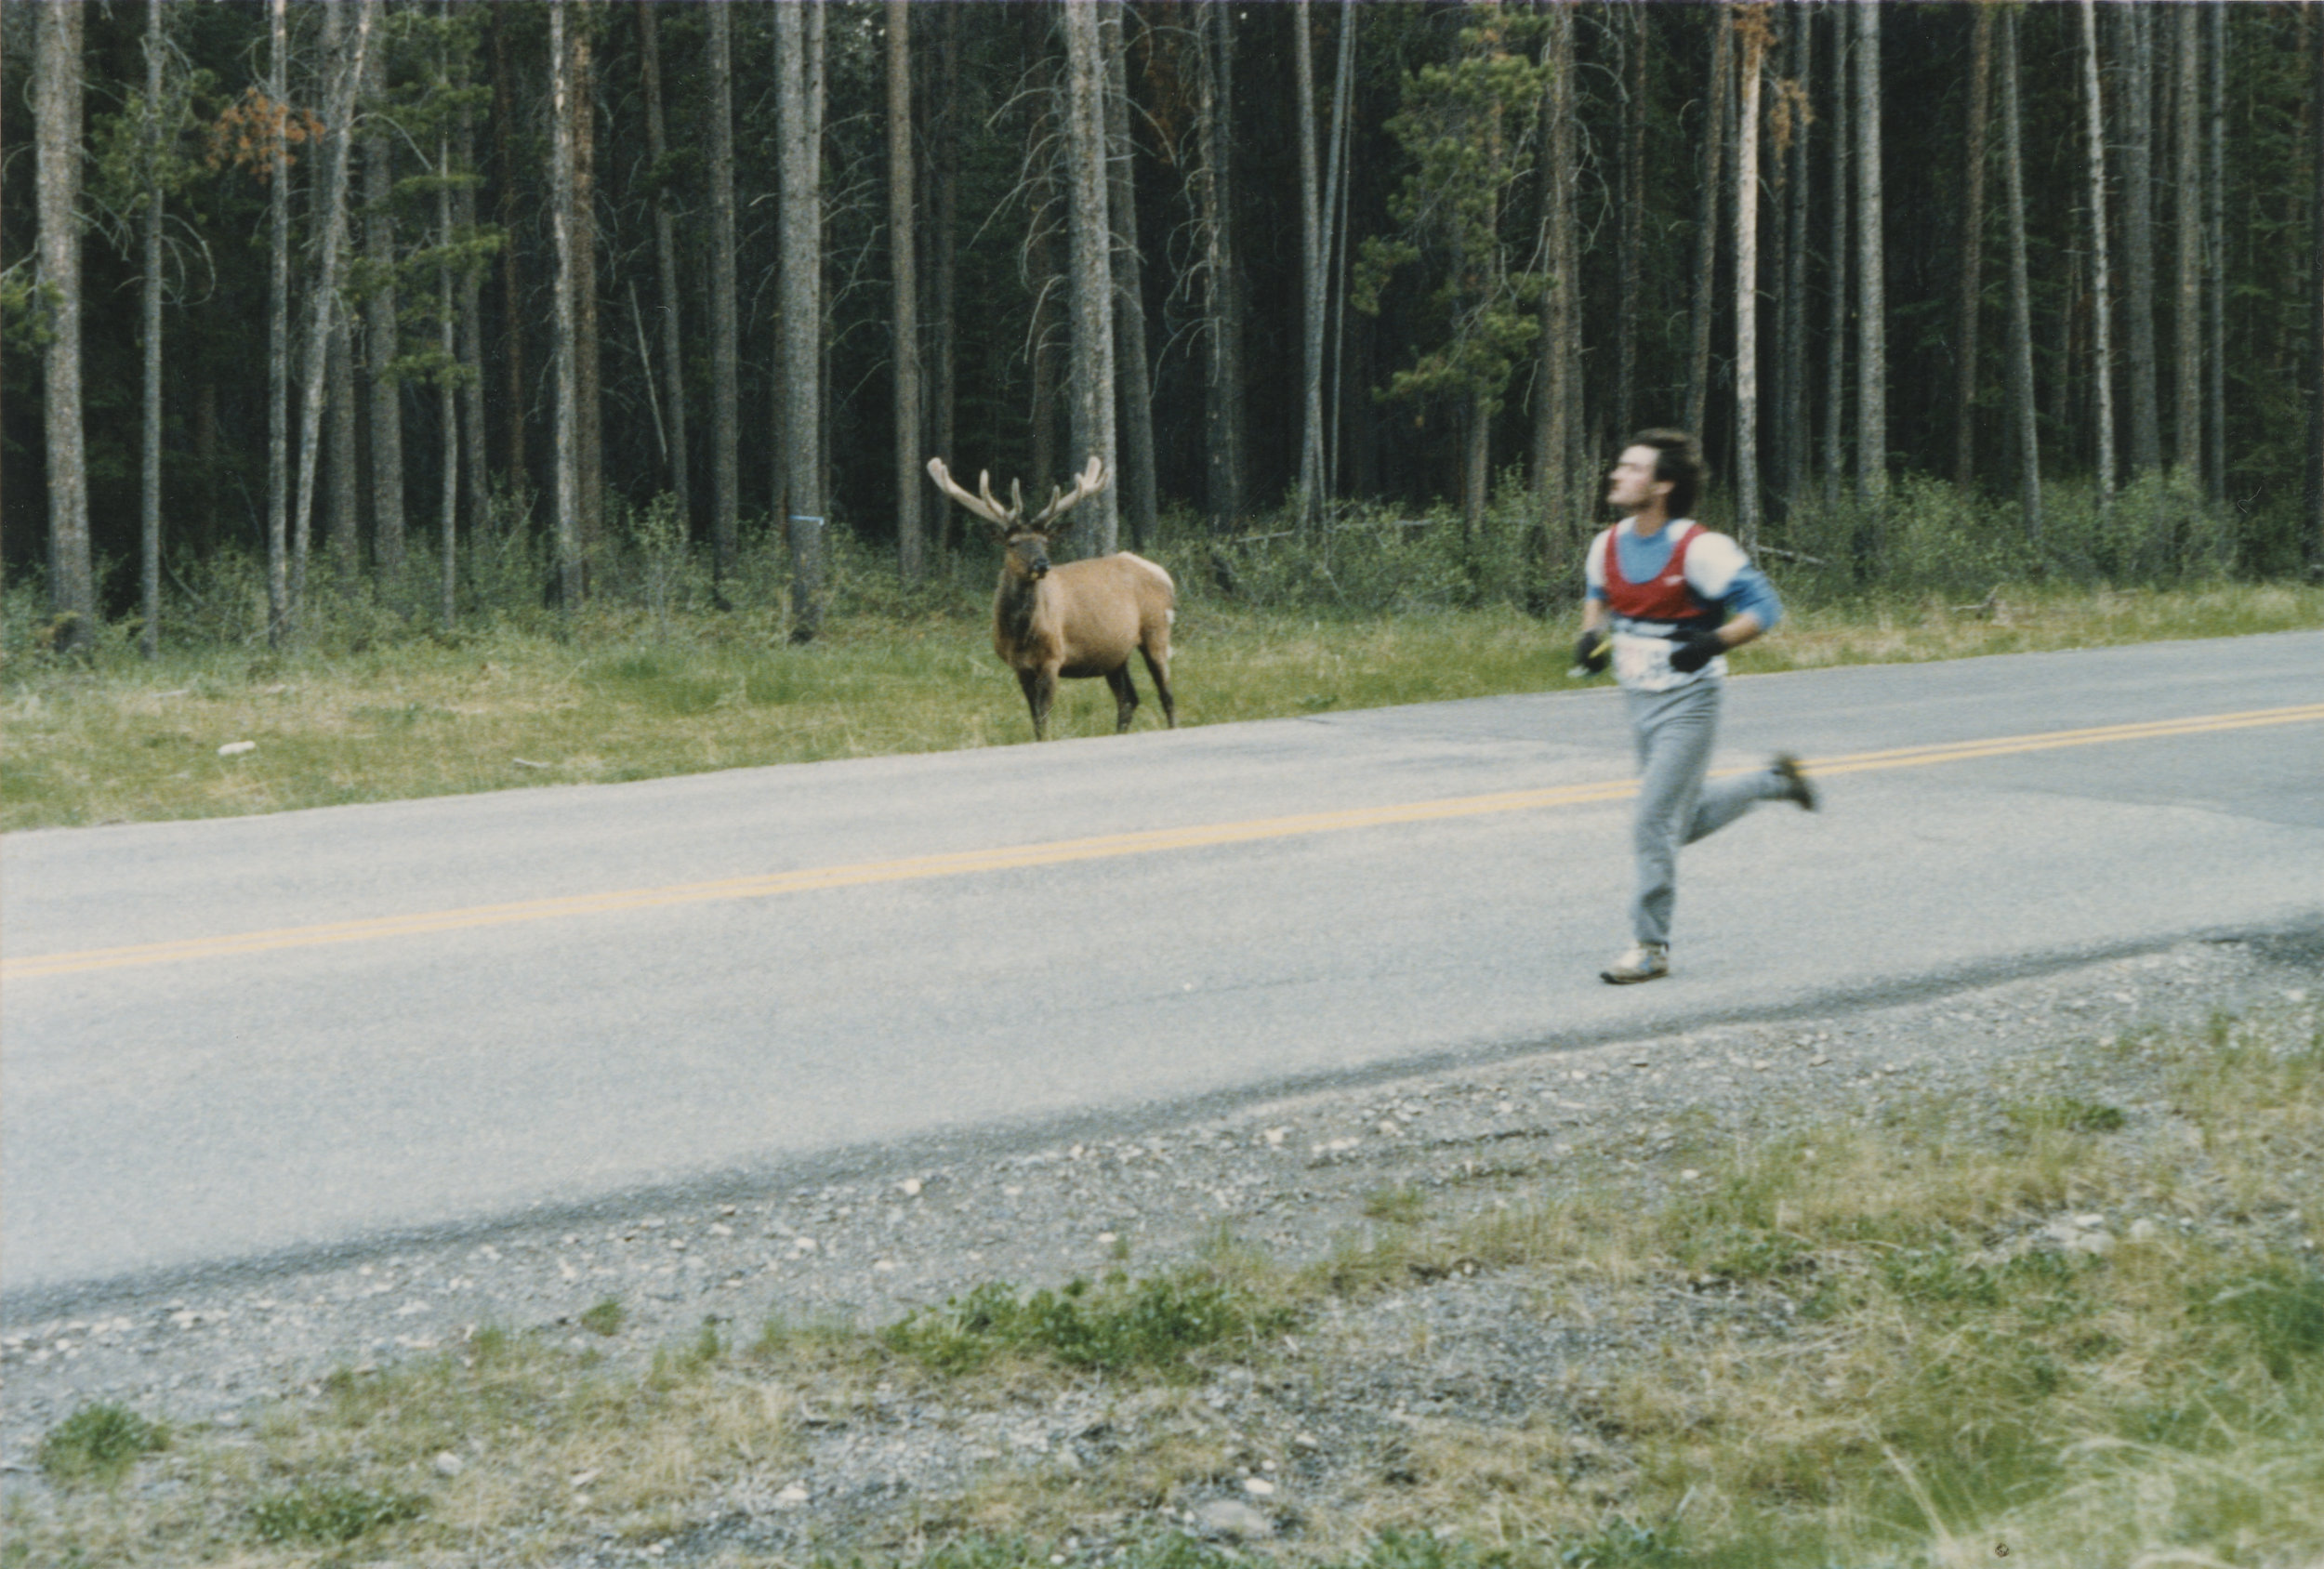 an elk (Wapiti in Cree) watching Murray Armstrong run past on the other side of the highway